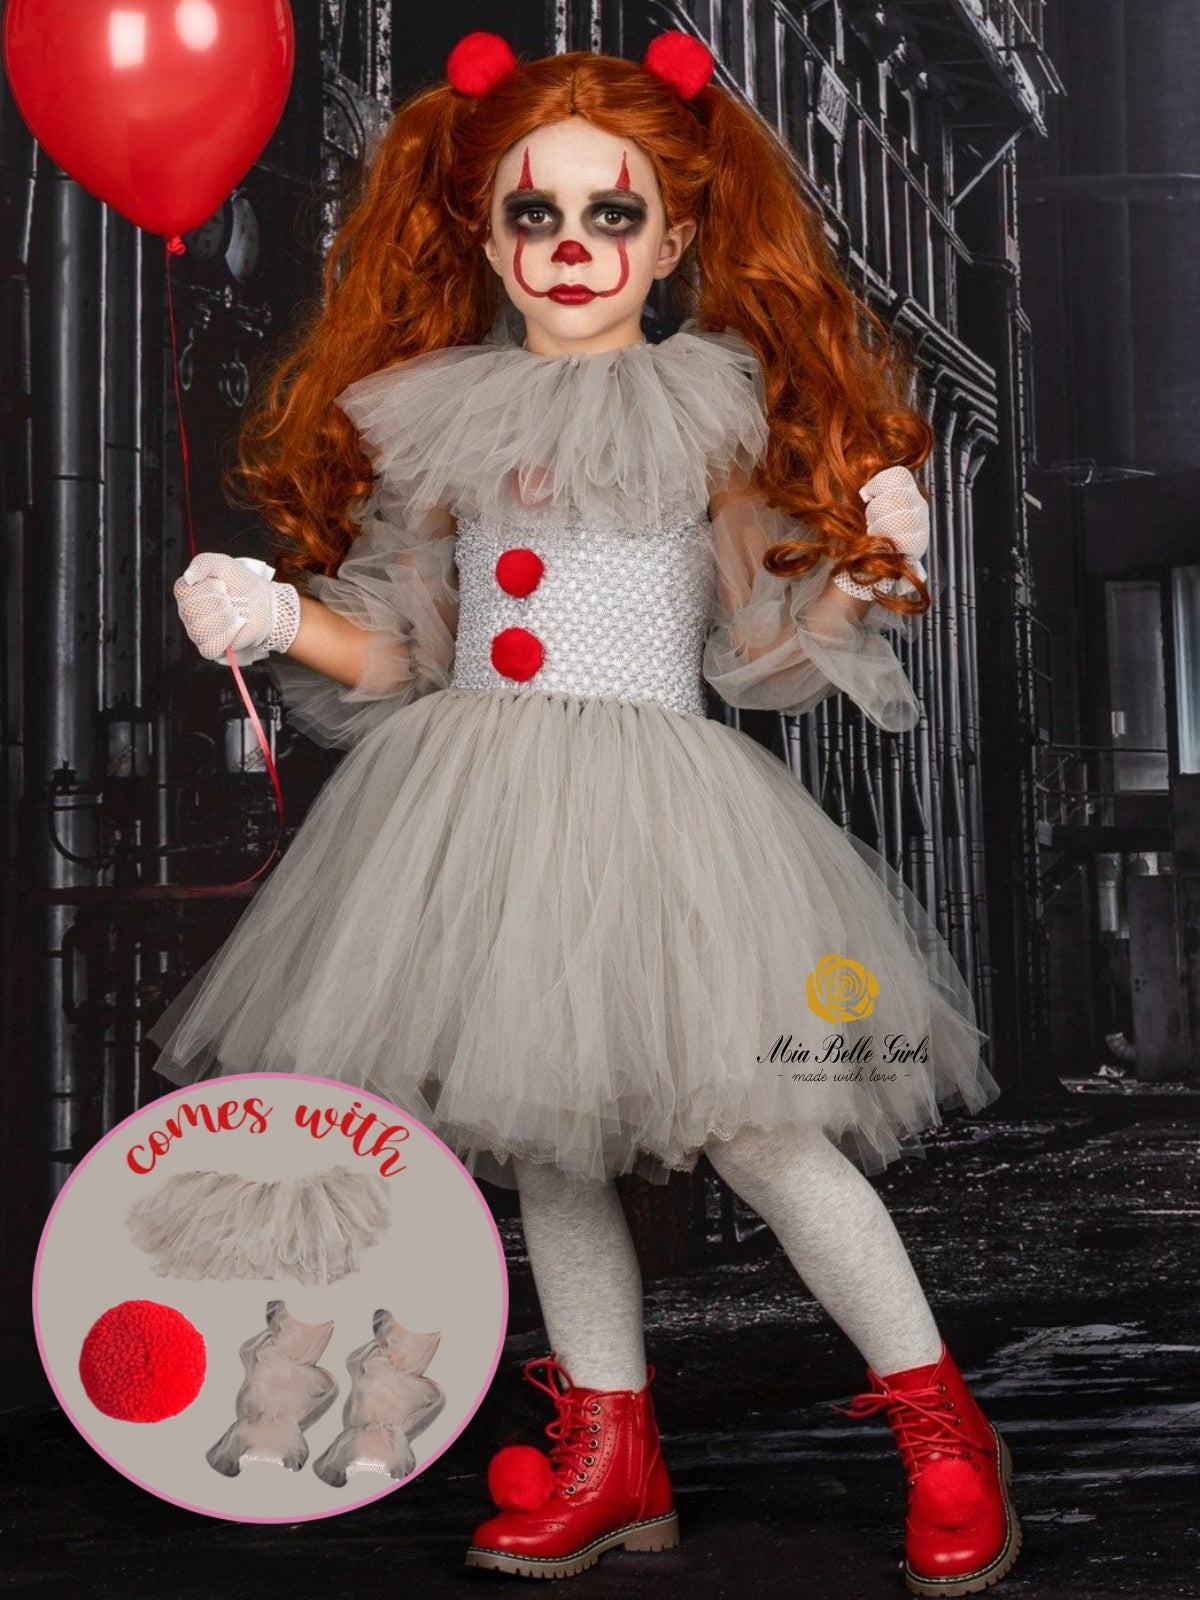 Pennywise girl costume